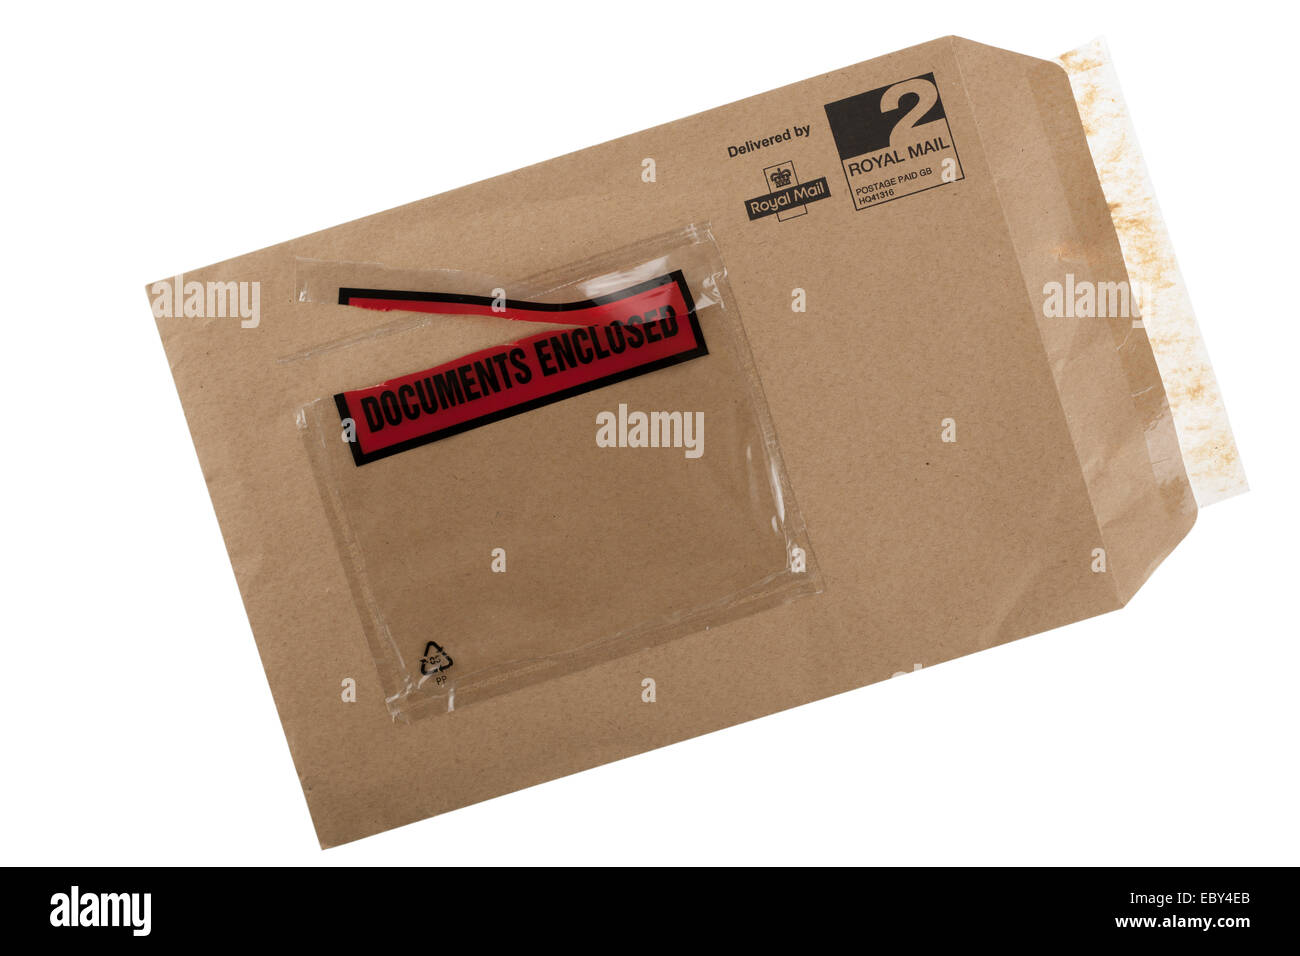 Unsealed opened Royal Mail brown envelope with removed documents enclosed Stock Photo